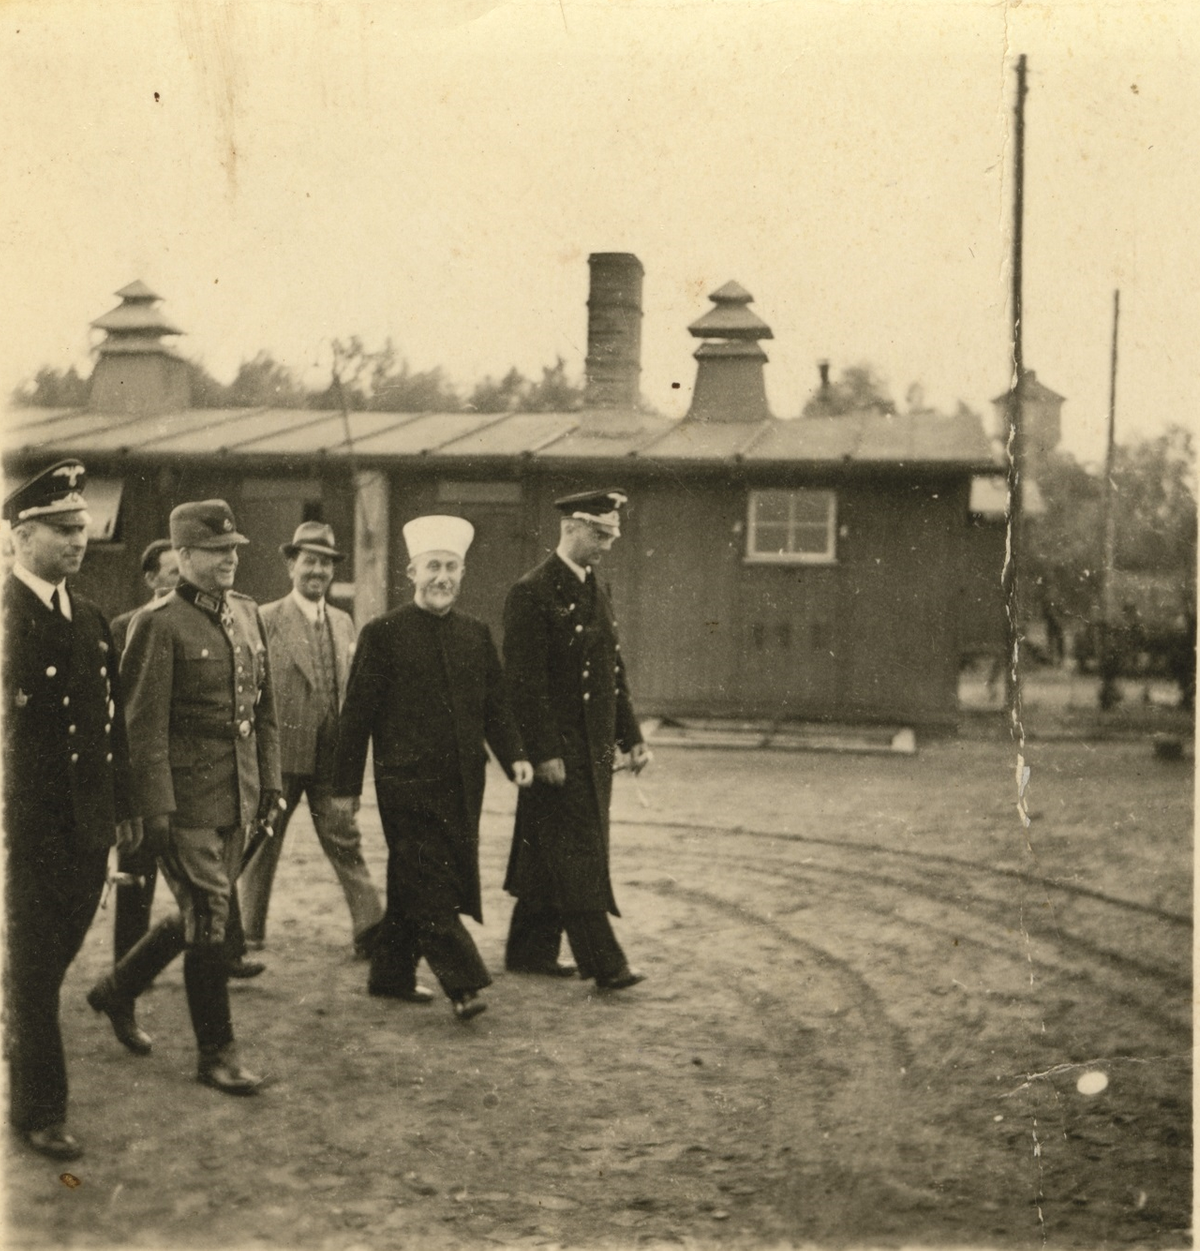 Photo 2, with Arthur Seyss-Inquart appearing second from left